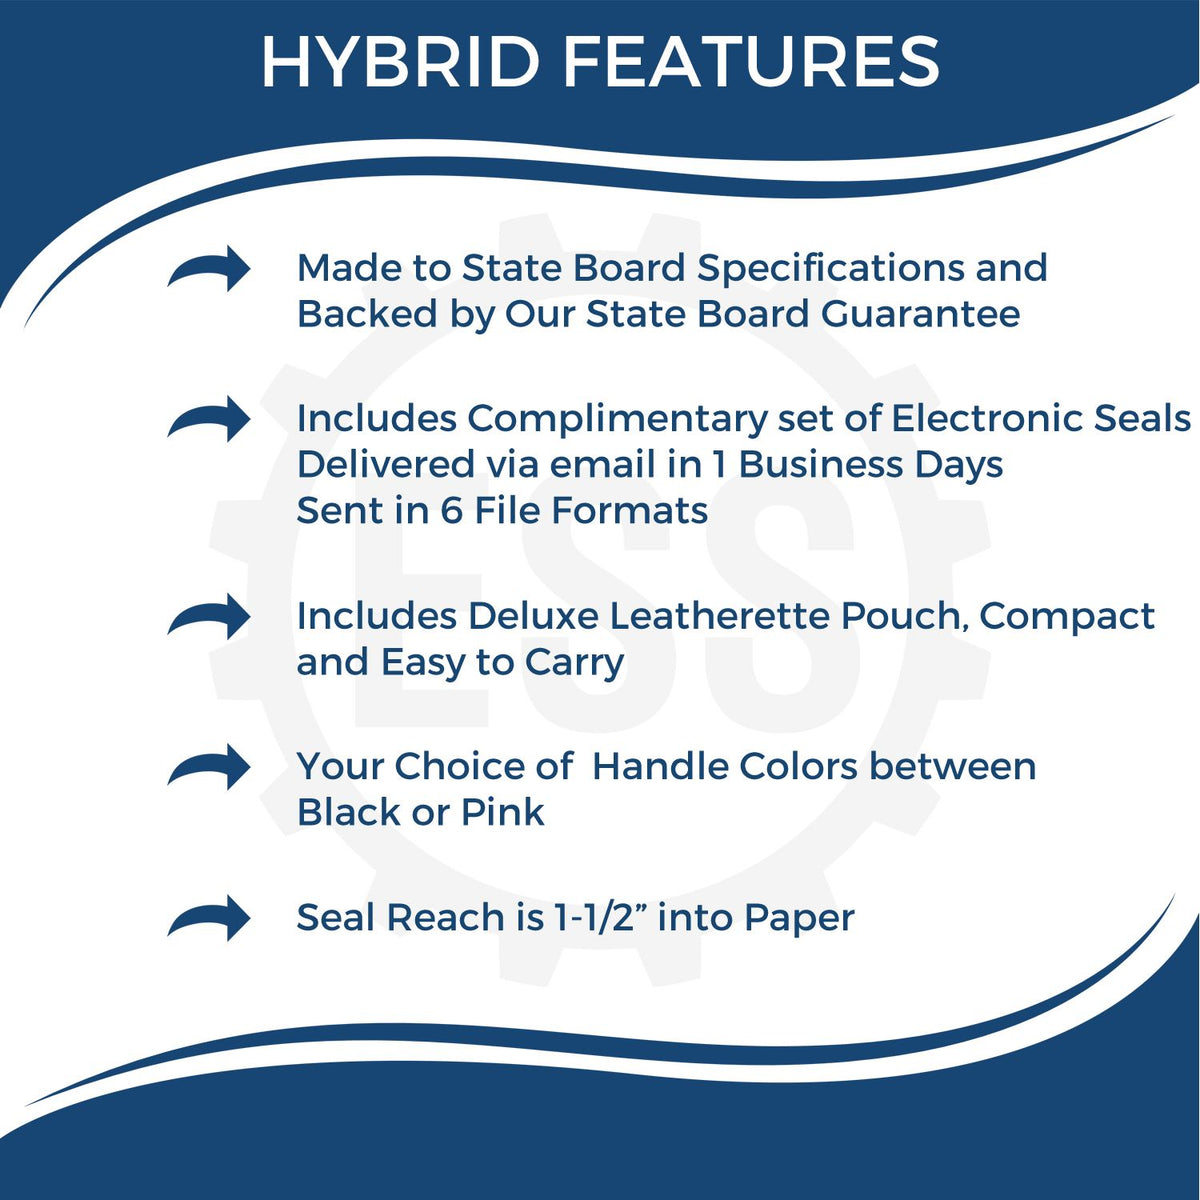 A picture of an infographic highlighting the selling points for the Hybrid Alabama Engineer Seal